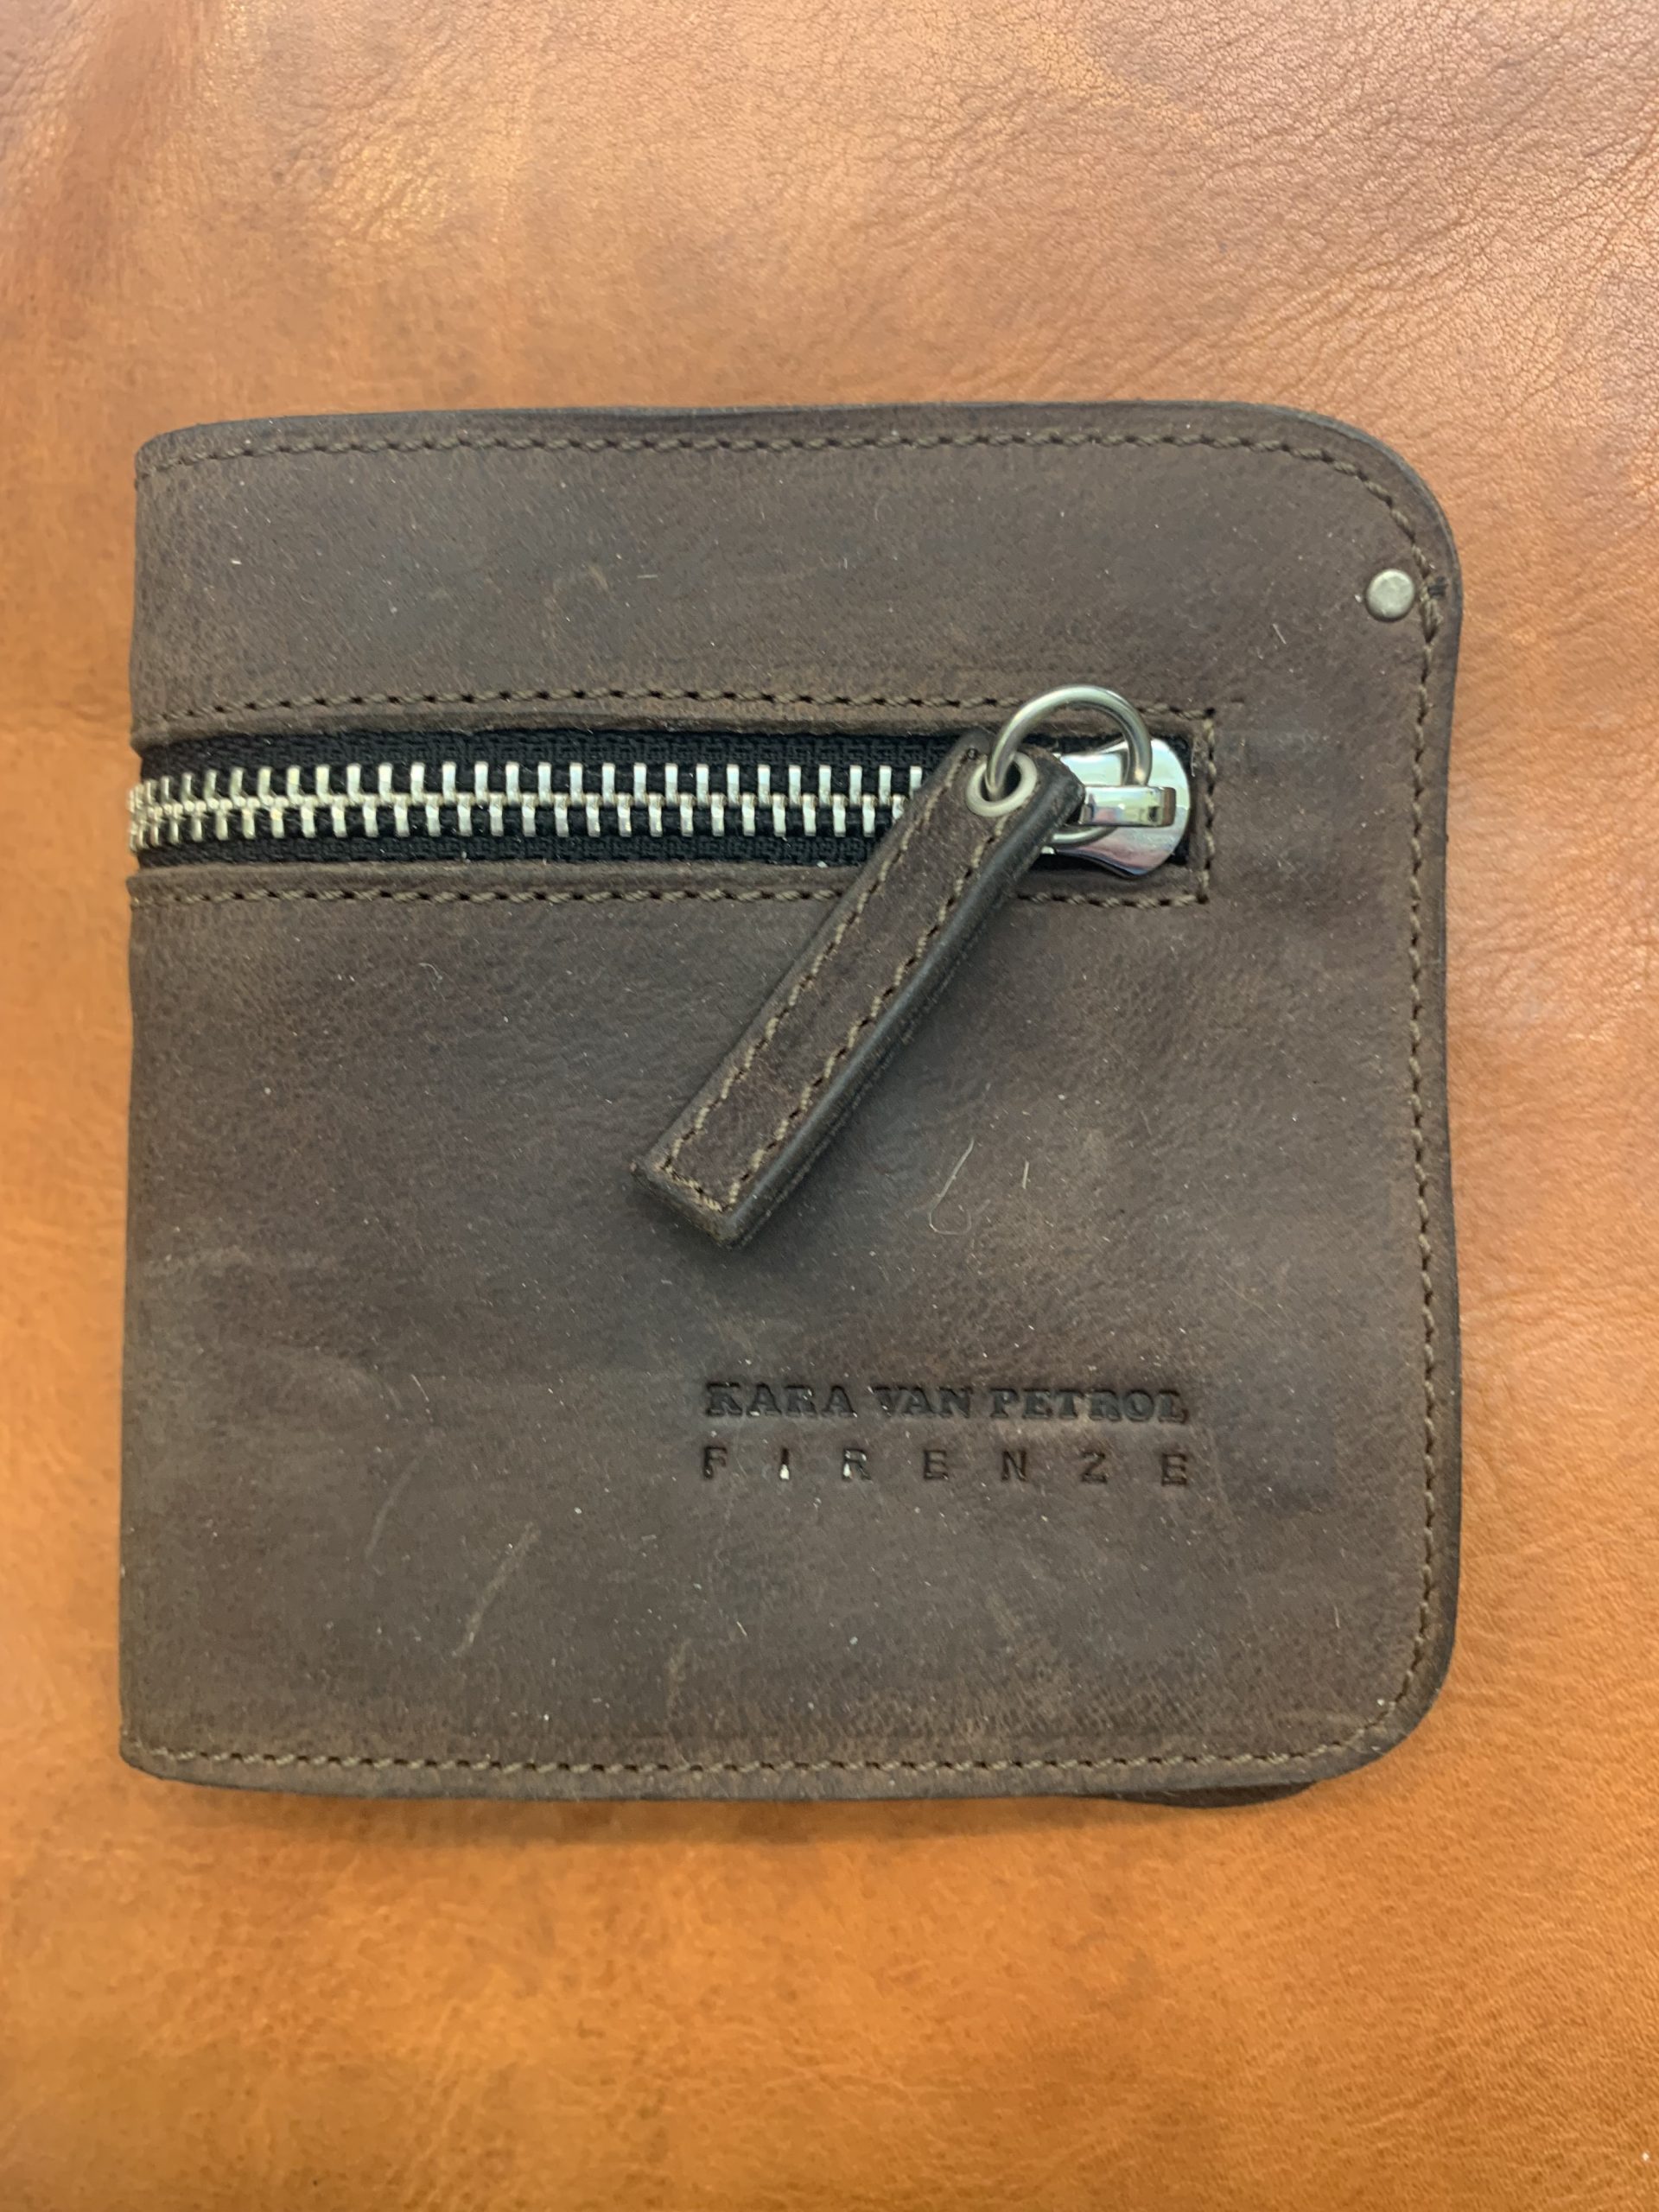 Woffy wallet